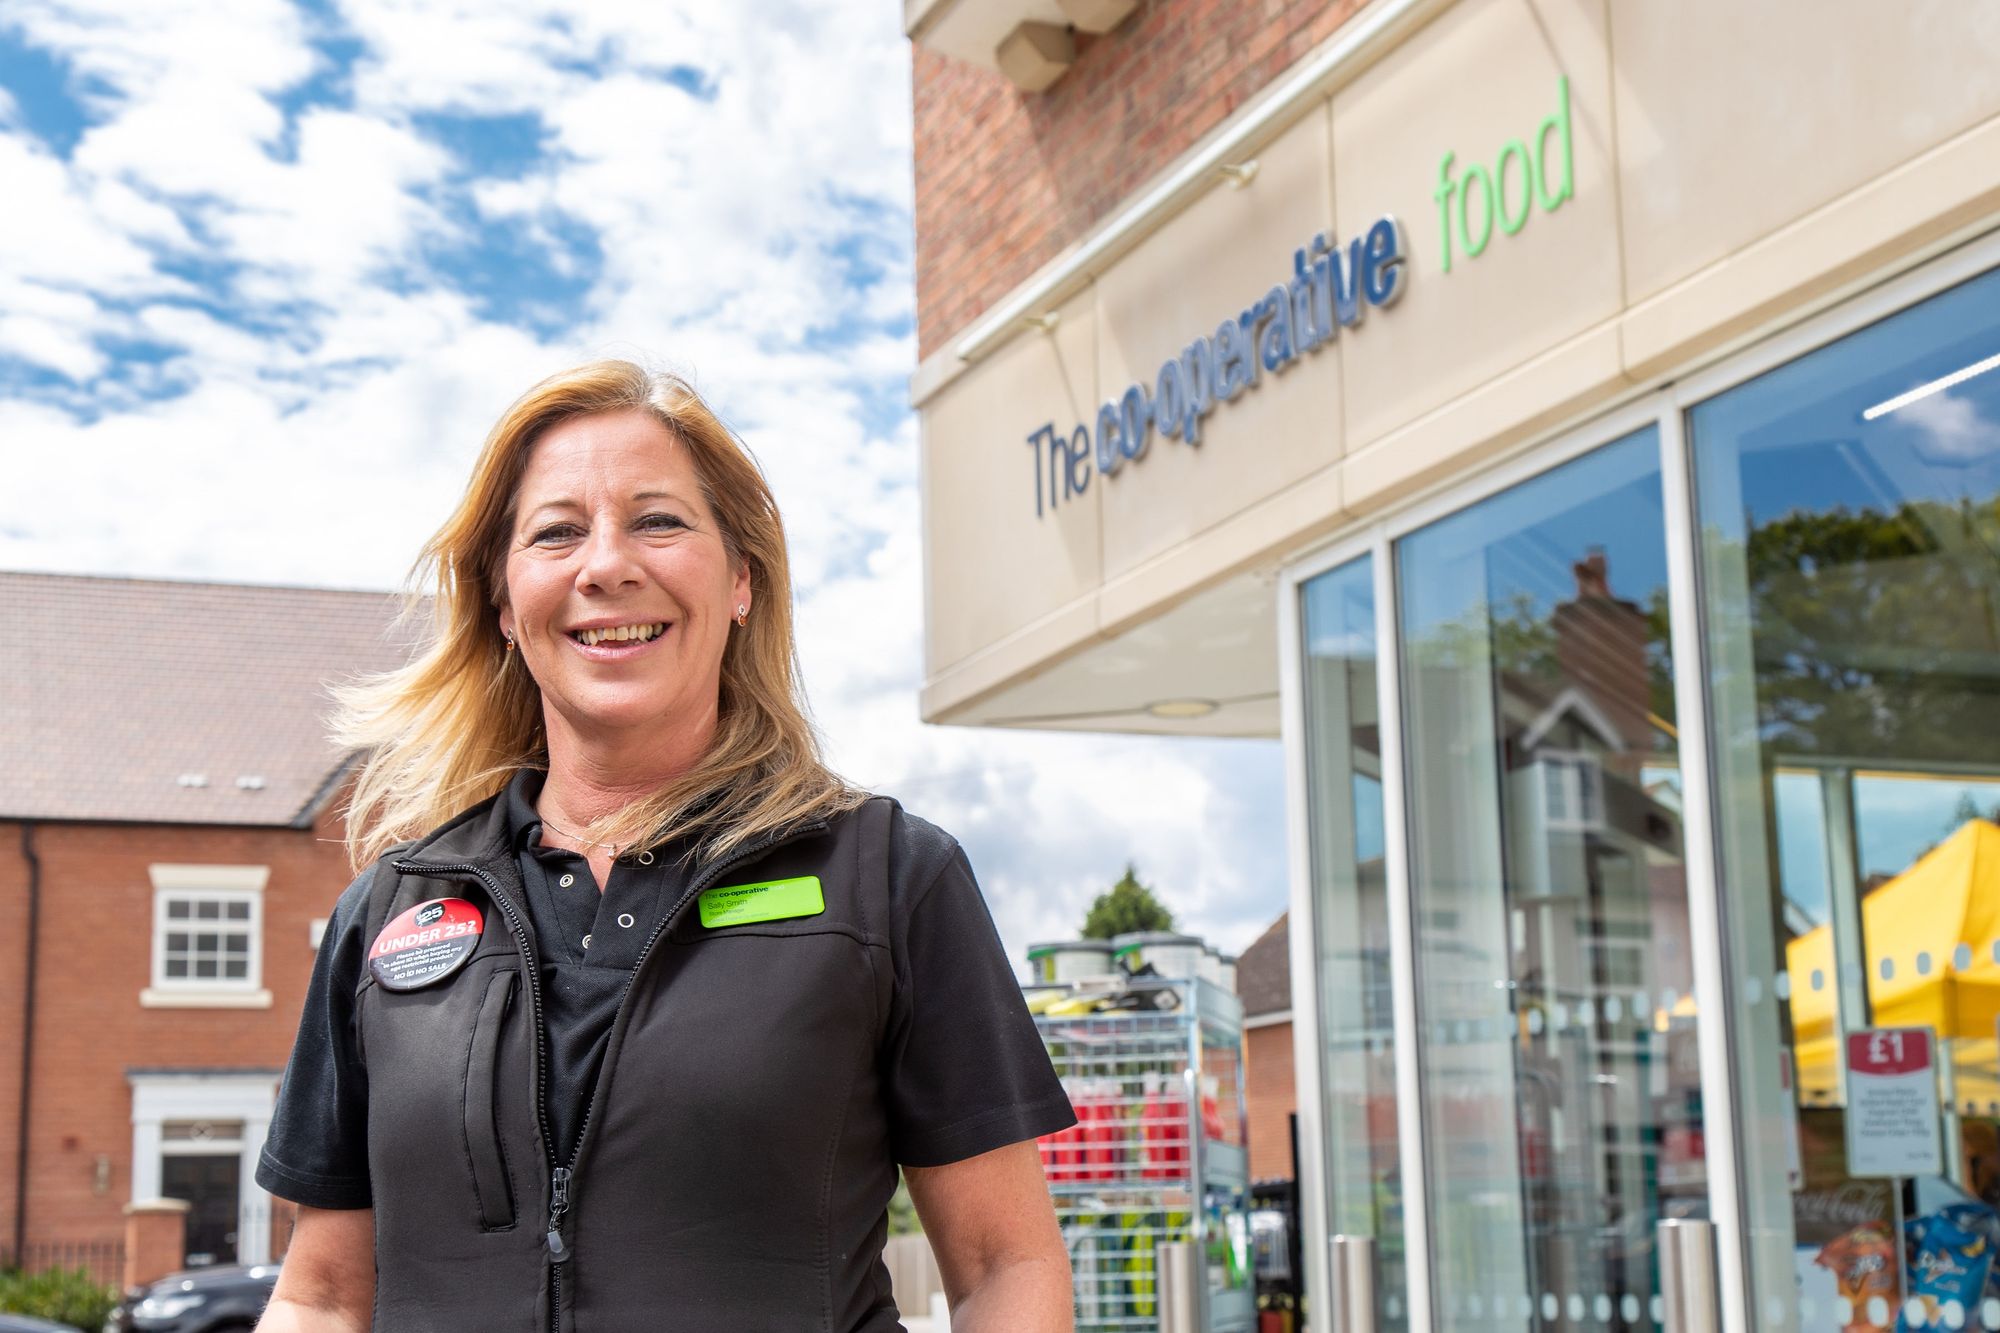 Quorn food store’s £108,000 makeover a source of pride for manager who grew up in village